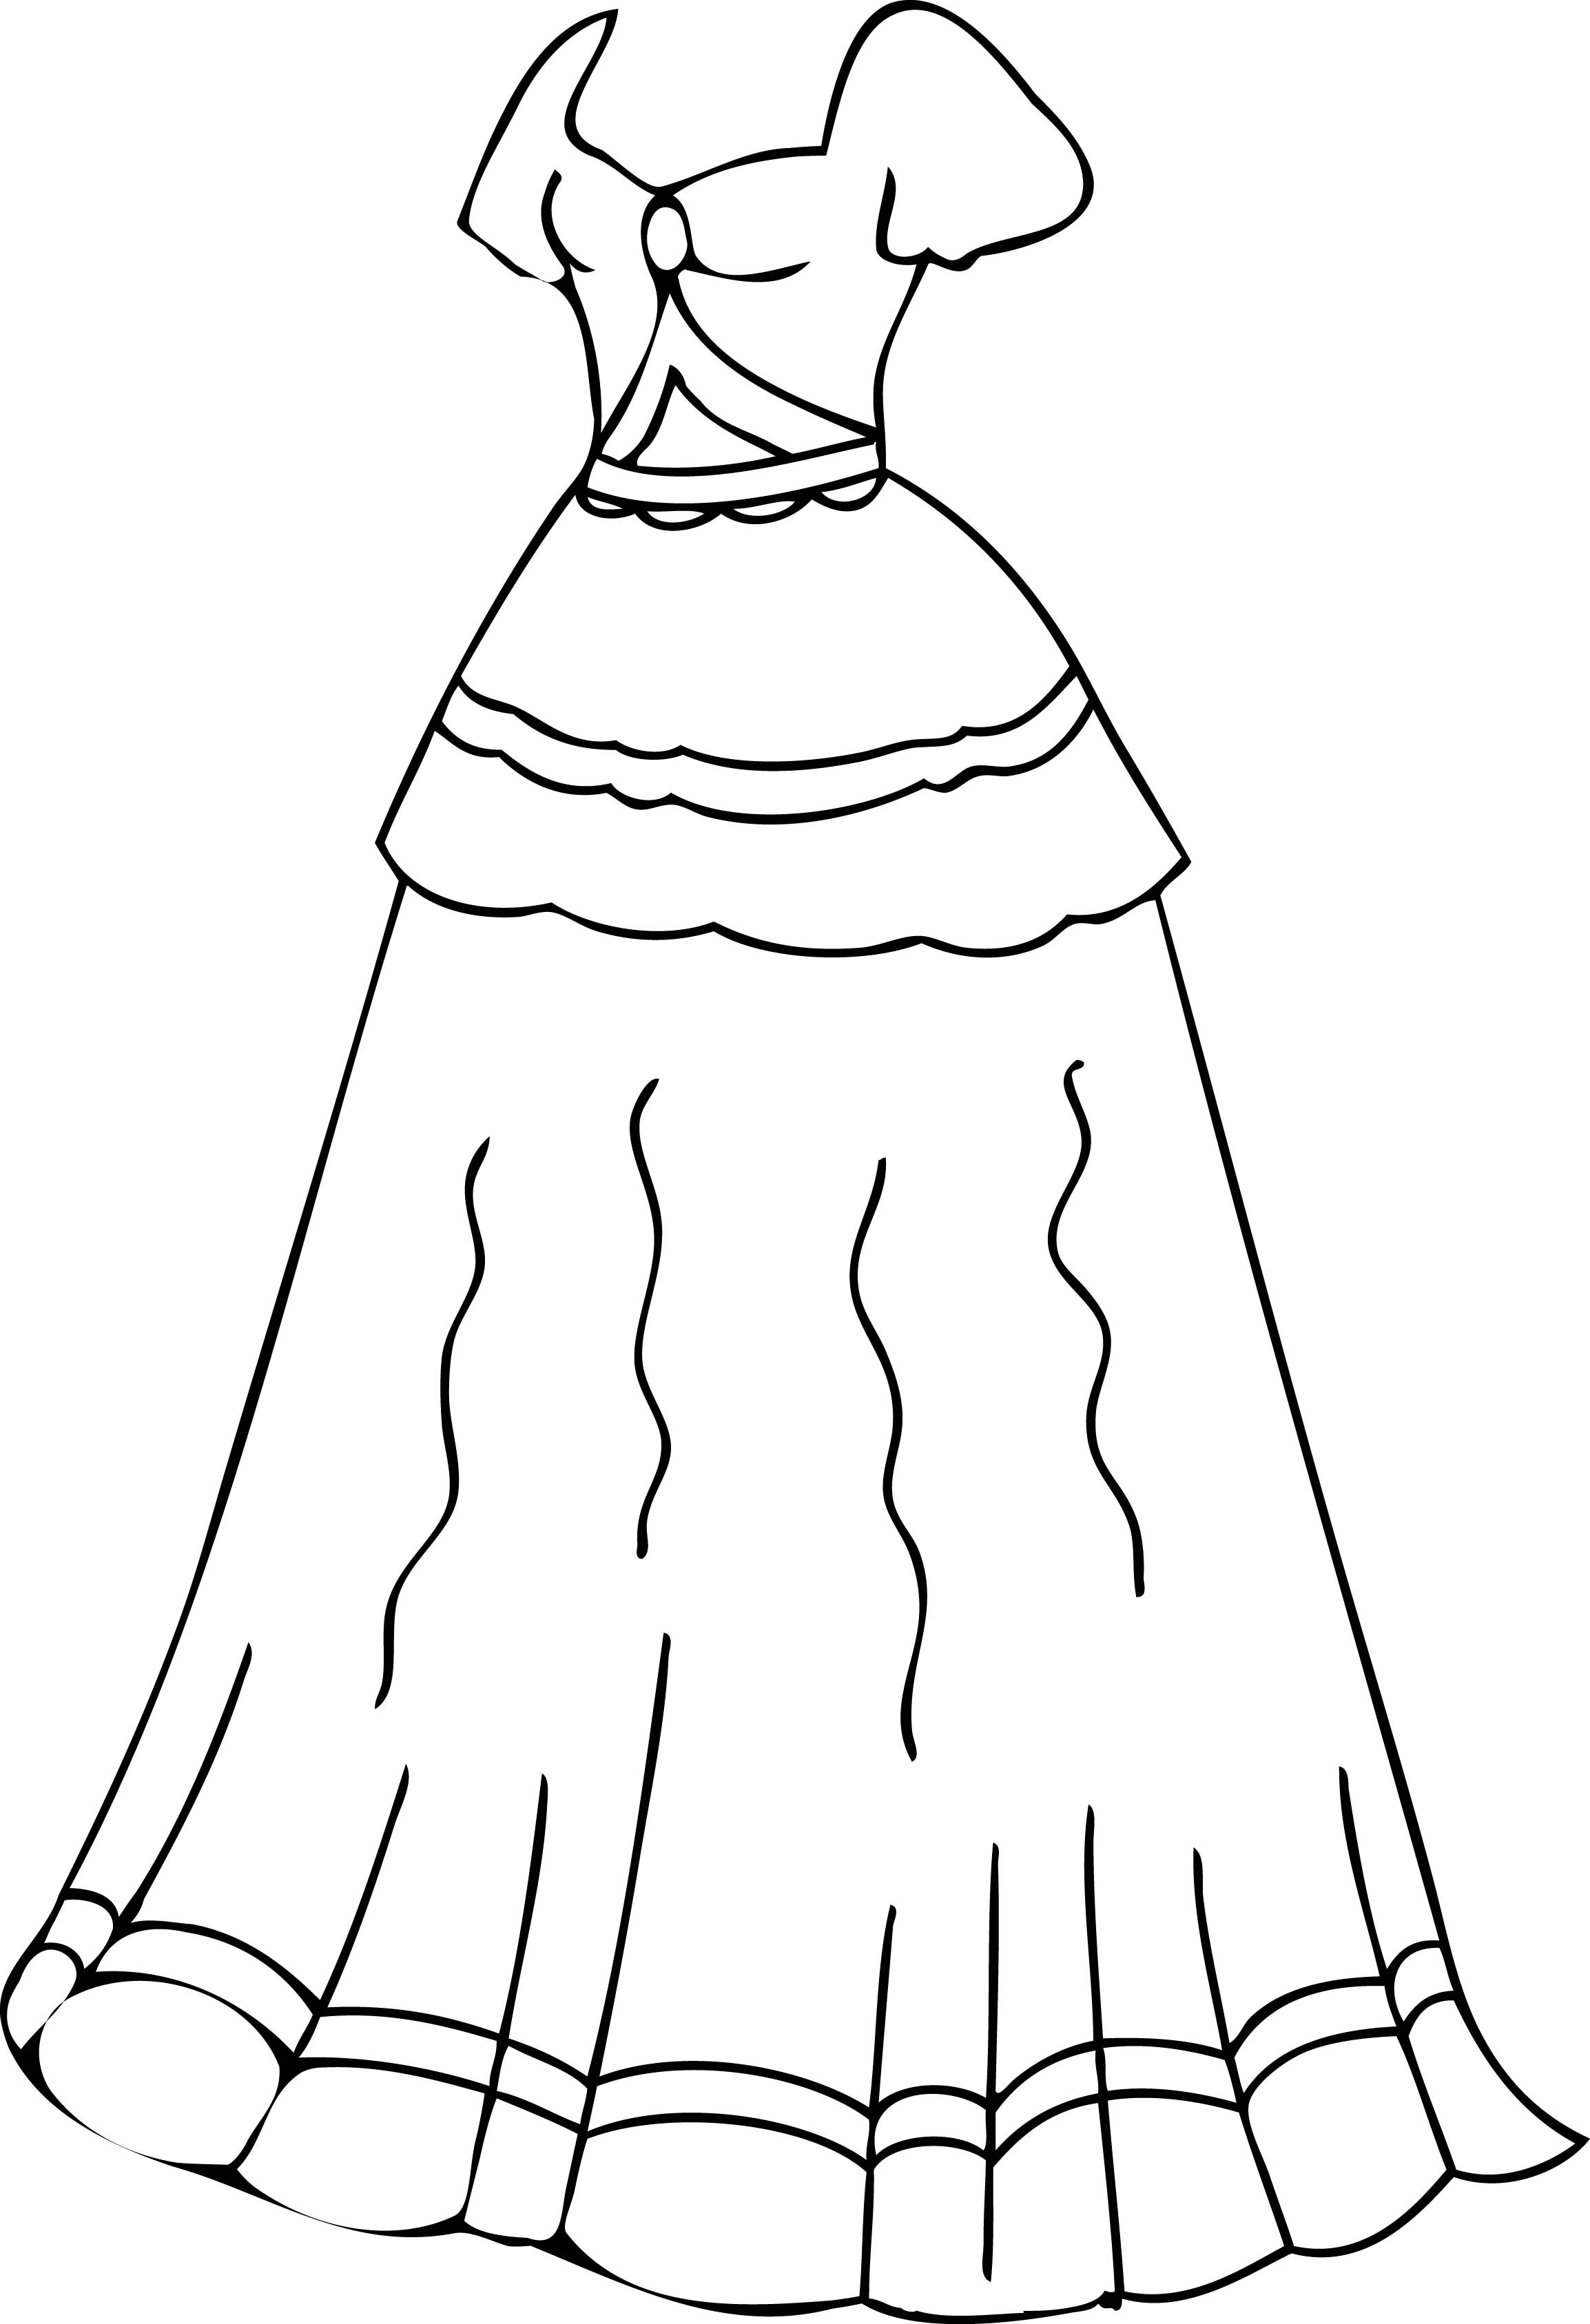 Coloring Pages Of Dresses
 Dress Coloring Pages Printable